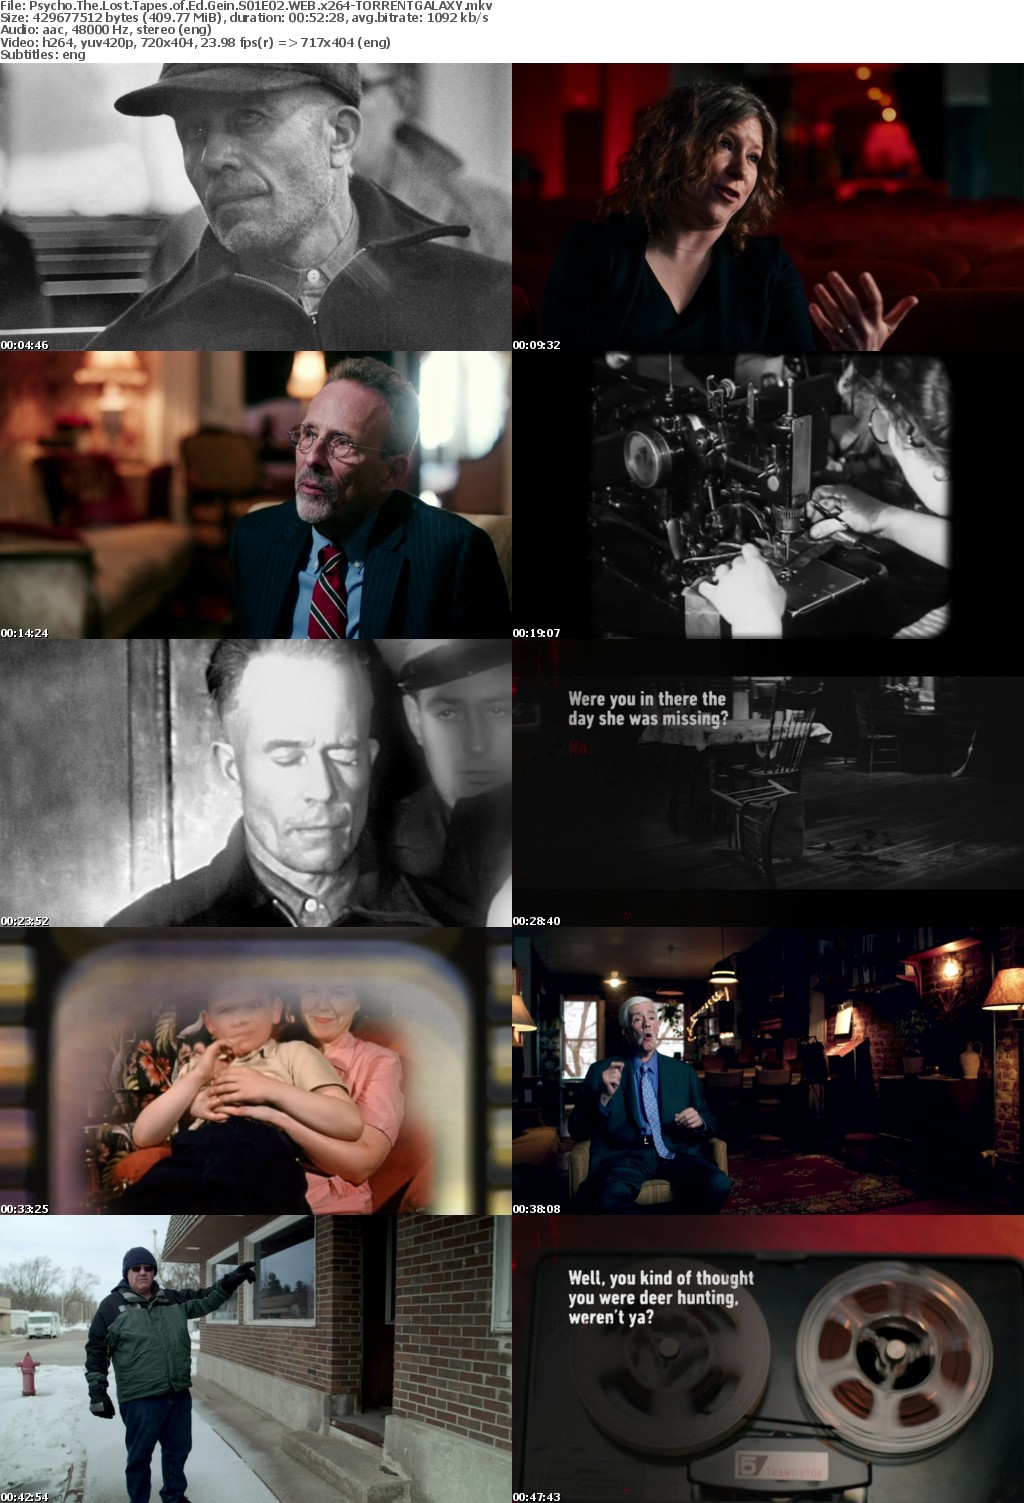 Psycho The Lost Tapes of Ed Gein S01E02 WEB x264-GALAXY